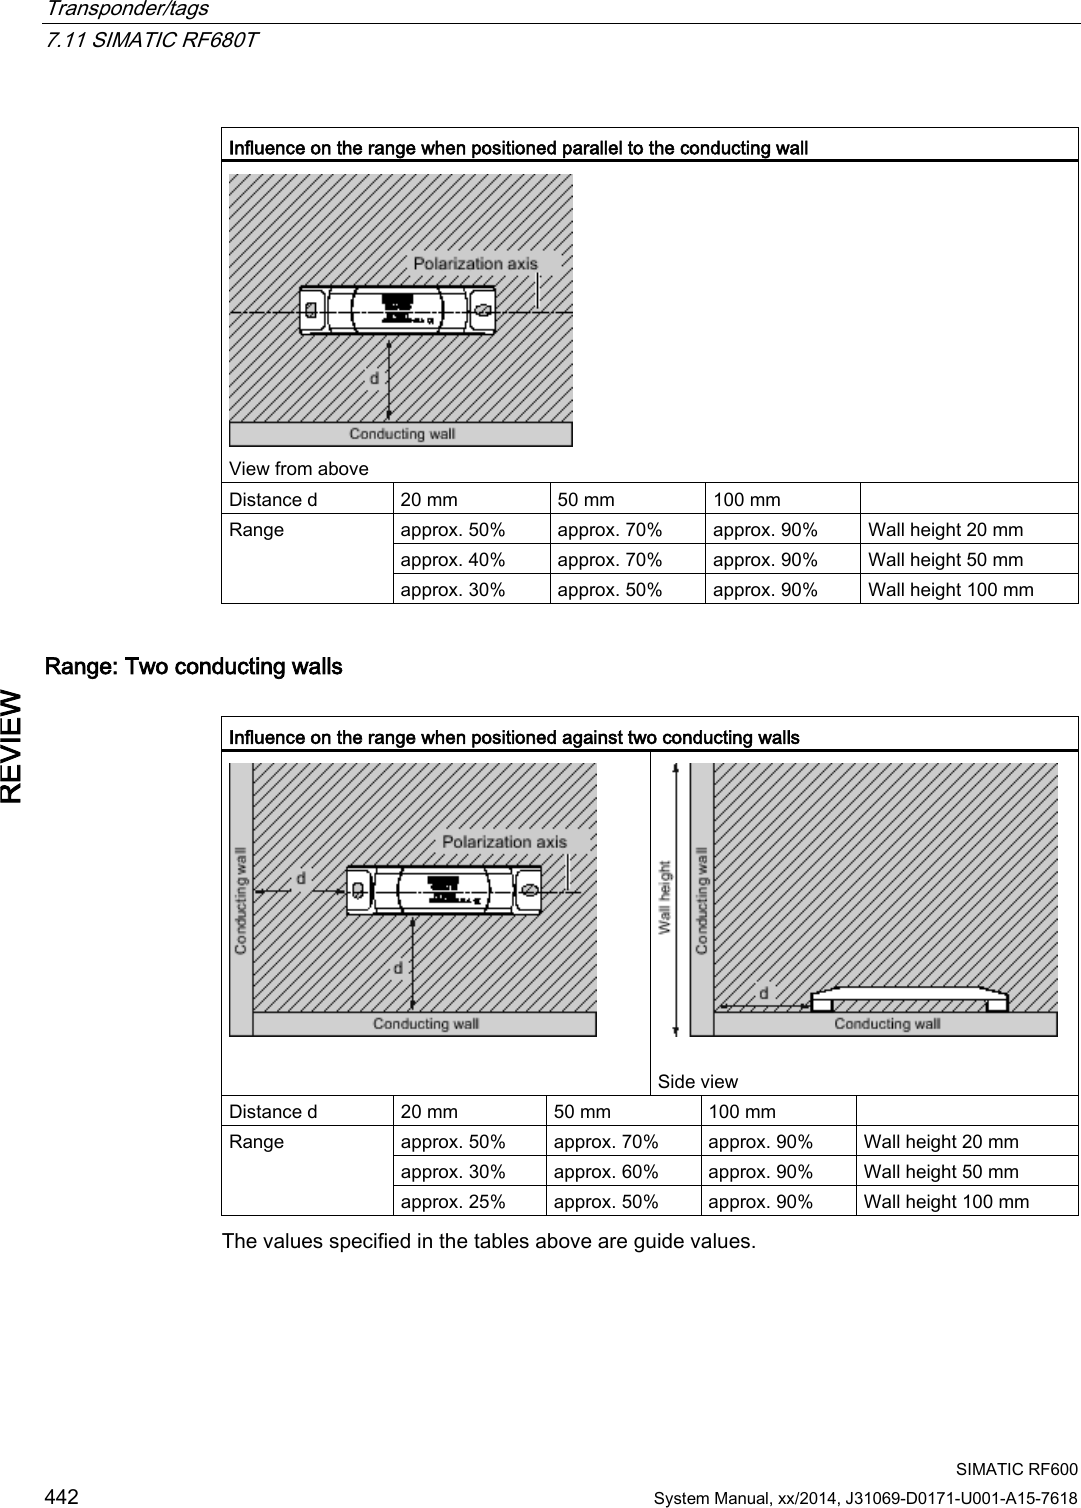 Transponder/tags   7.11 SIMATIC RF680T  SIMATIC RF600 442 System Manual, xx/2014, J31069-D0171-U001-A15-7618 REVIEW  Influence on the range when positioned parallel to the conducting wall  View from above  Distance d 20 mm 50 mm 100 mm  Range approx. 50% approx. 70% approx. 90% Wall height 20 mm approx. 40% approx. 70% approx. 90% Wall height 50 mm approx. 30% approx. 50% approx. 90% Wall height 100 mm Range: Two conducting walls  Influence on the range when positioned against two conducting walls     Side view Distance d 20 mm 50 mm 100 mm  Range approx. 50% approx. 70% approx. 90% Wall height 20 mm approx. 30% approx. 60% approx. 90% Wall height 50 mm approx. 25% approx. 50% approx. 90% Wall height 100 mm The values specified in the tables above are guide values.  